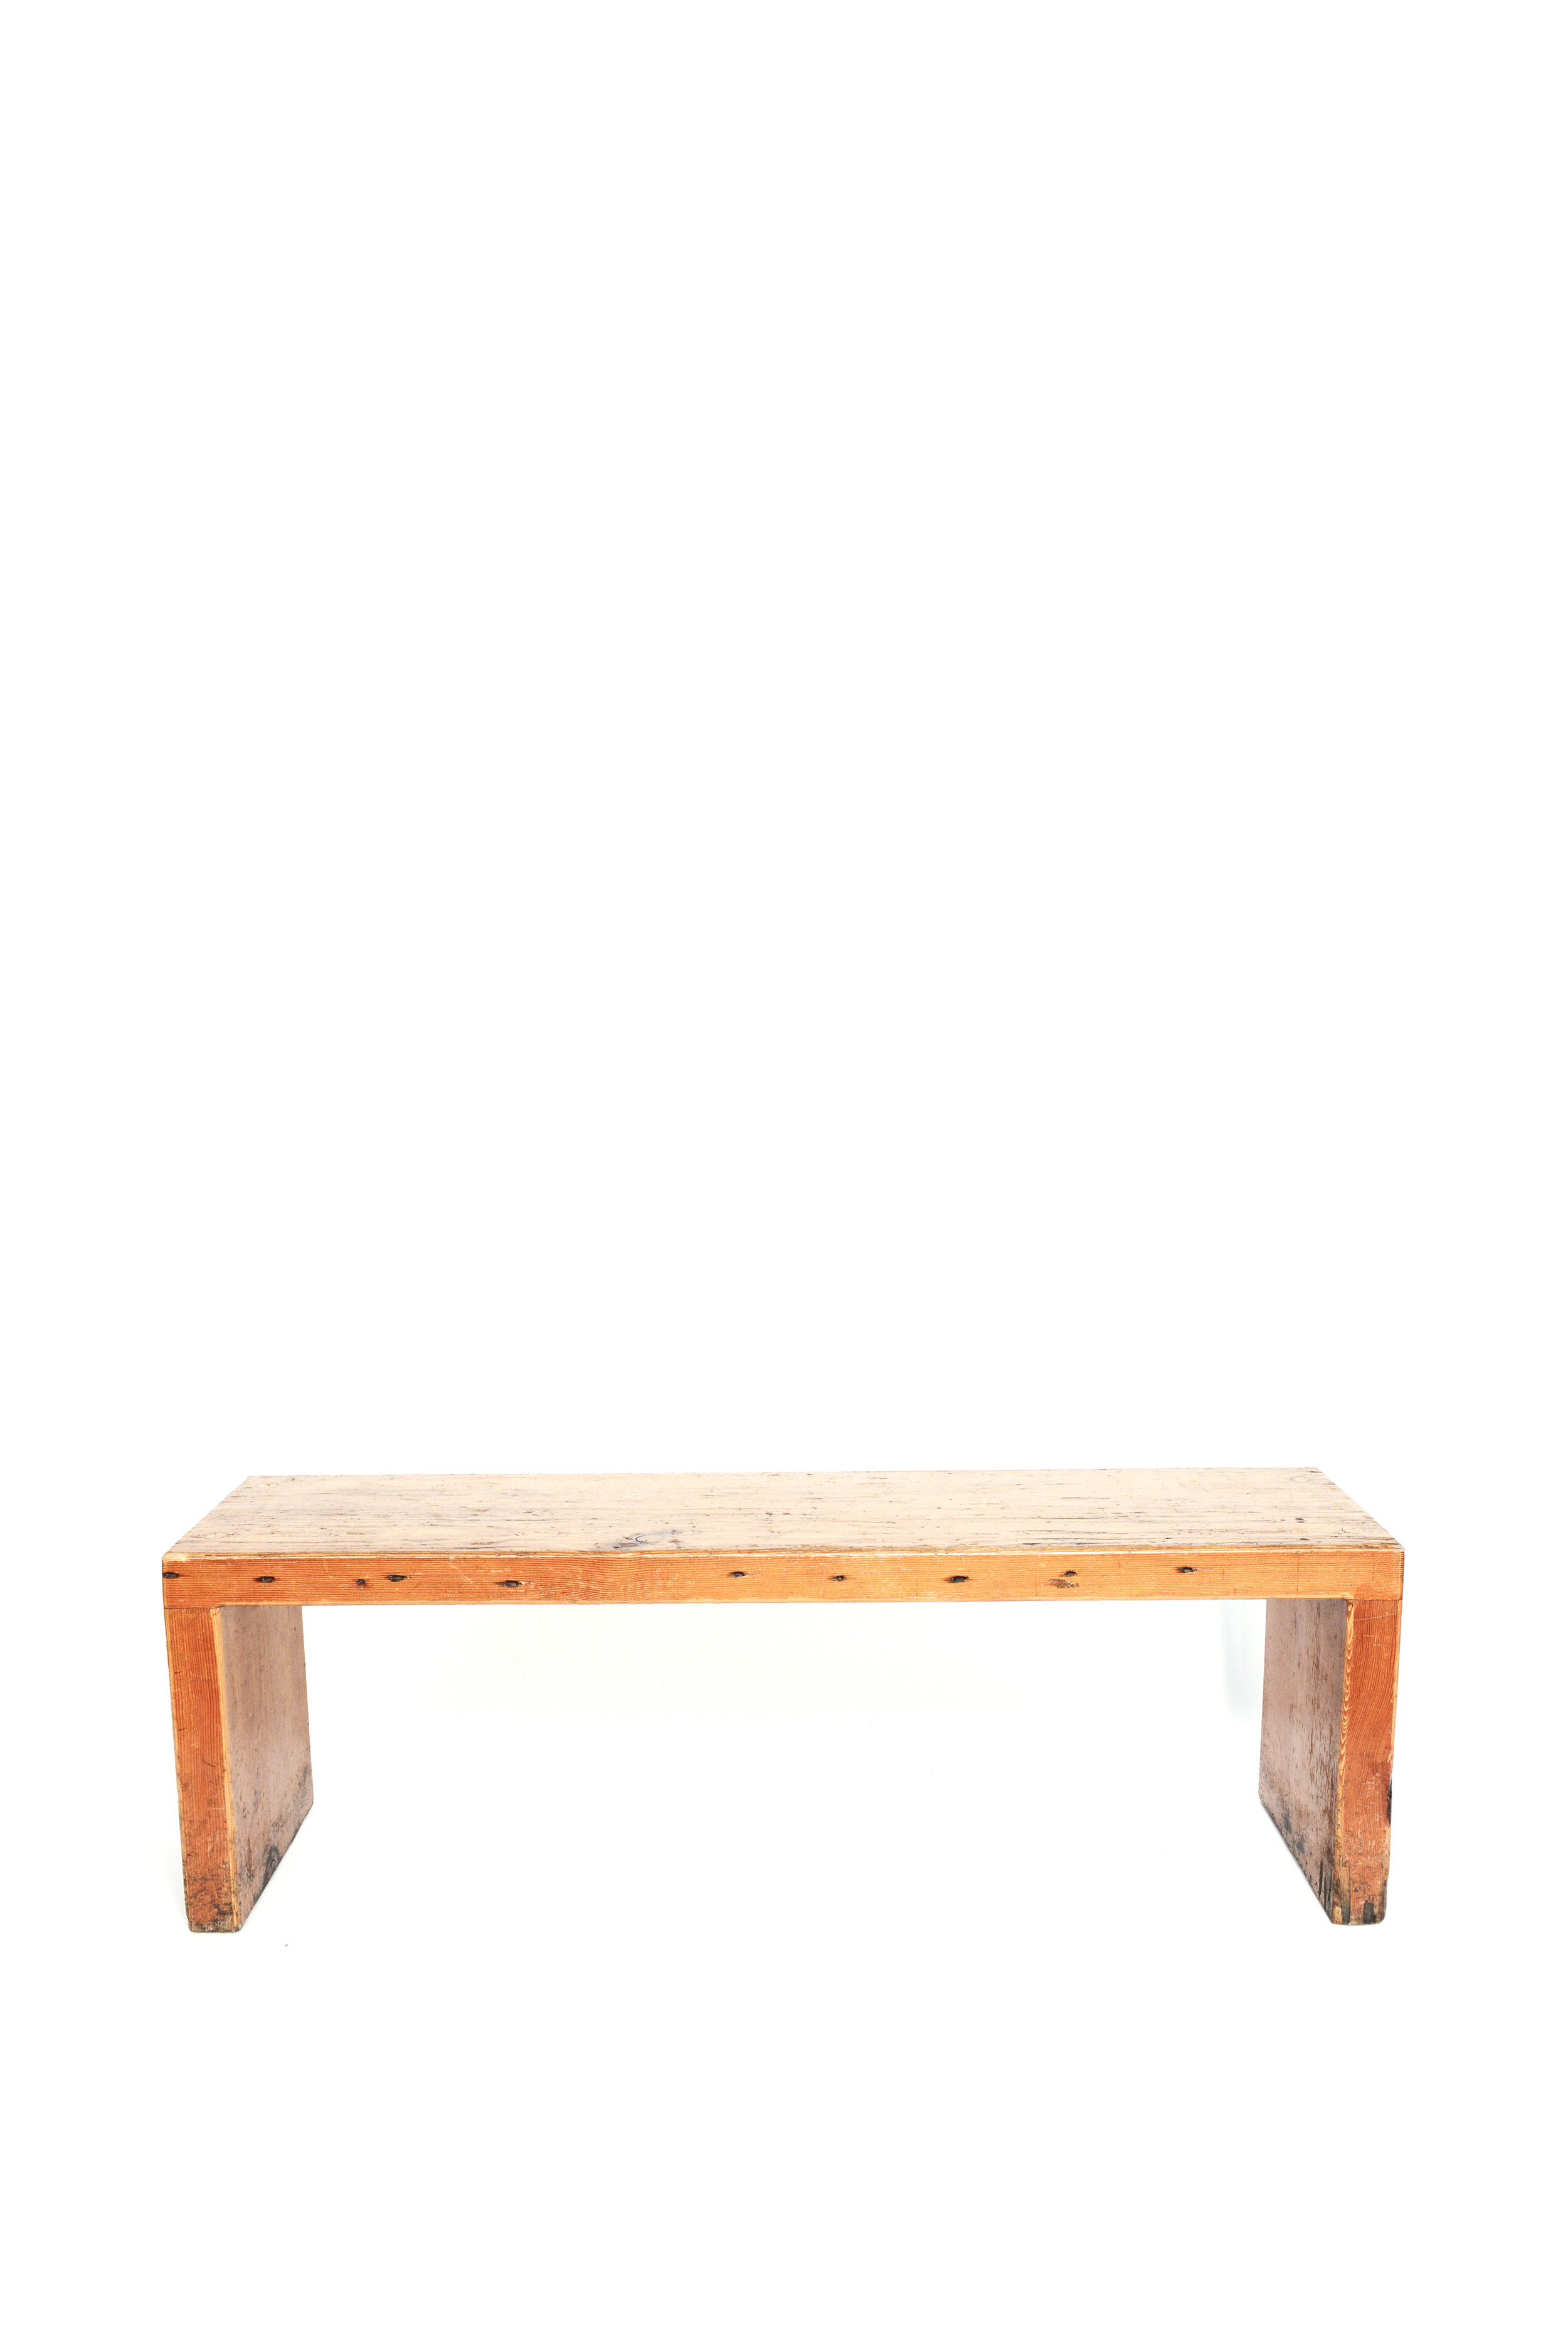 Wood Benches qty. 12